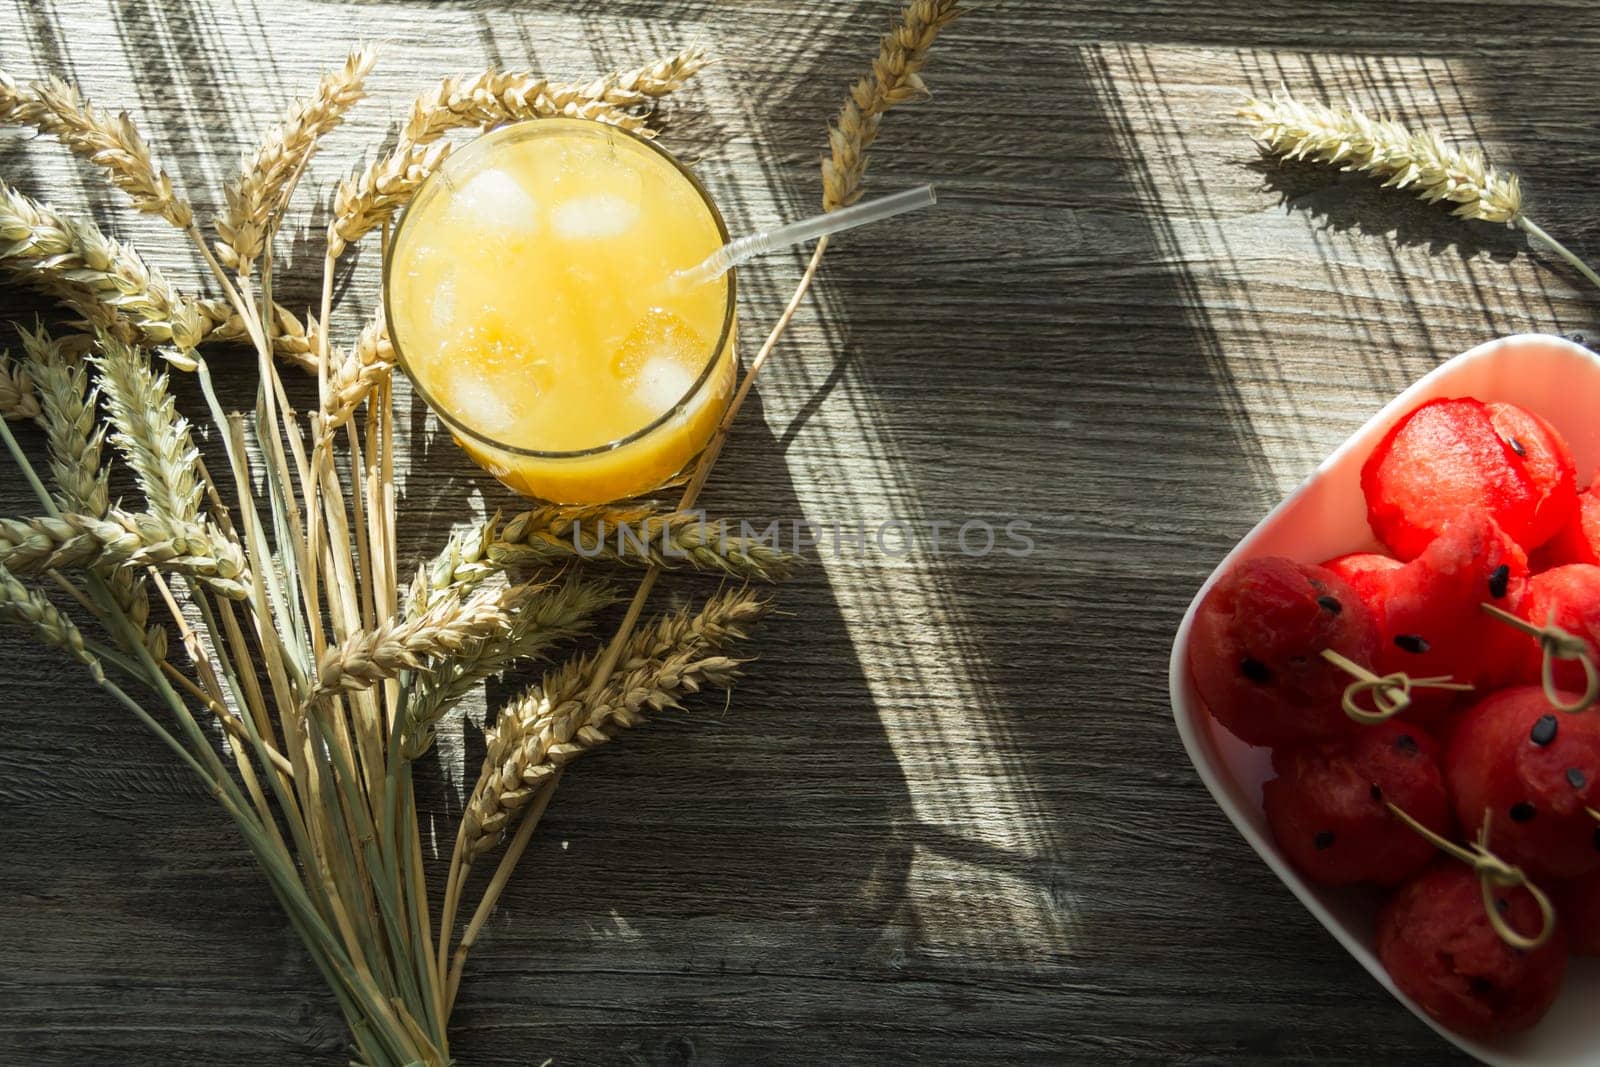 Freshly squeezed orange juice, sweet watermelon dessert and spikelets of ripe wheat on a wooden table in the sunlight